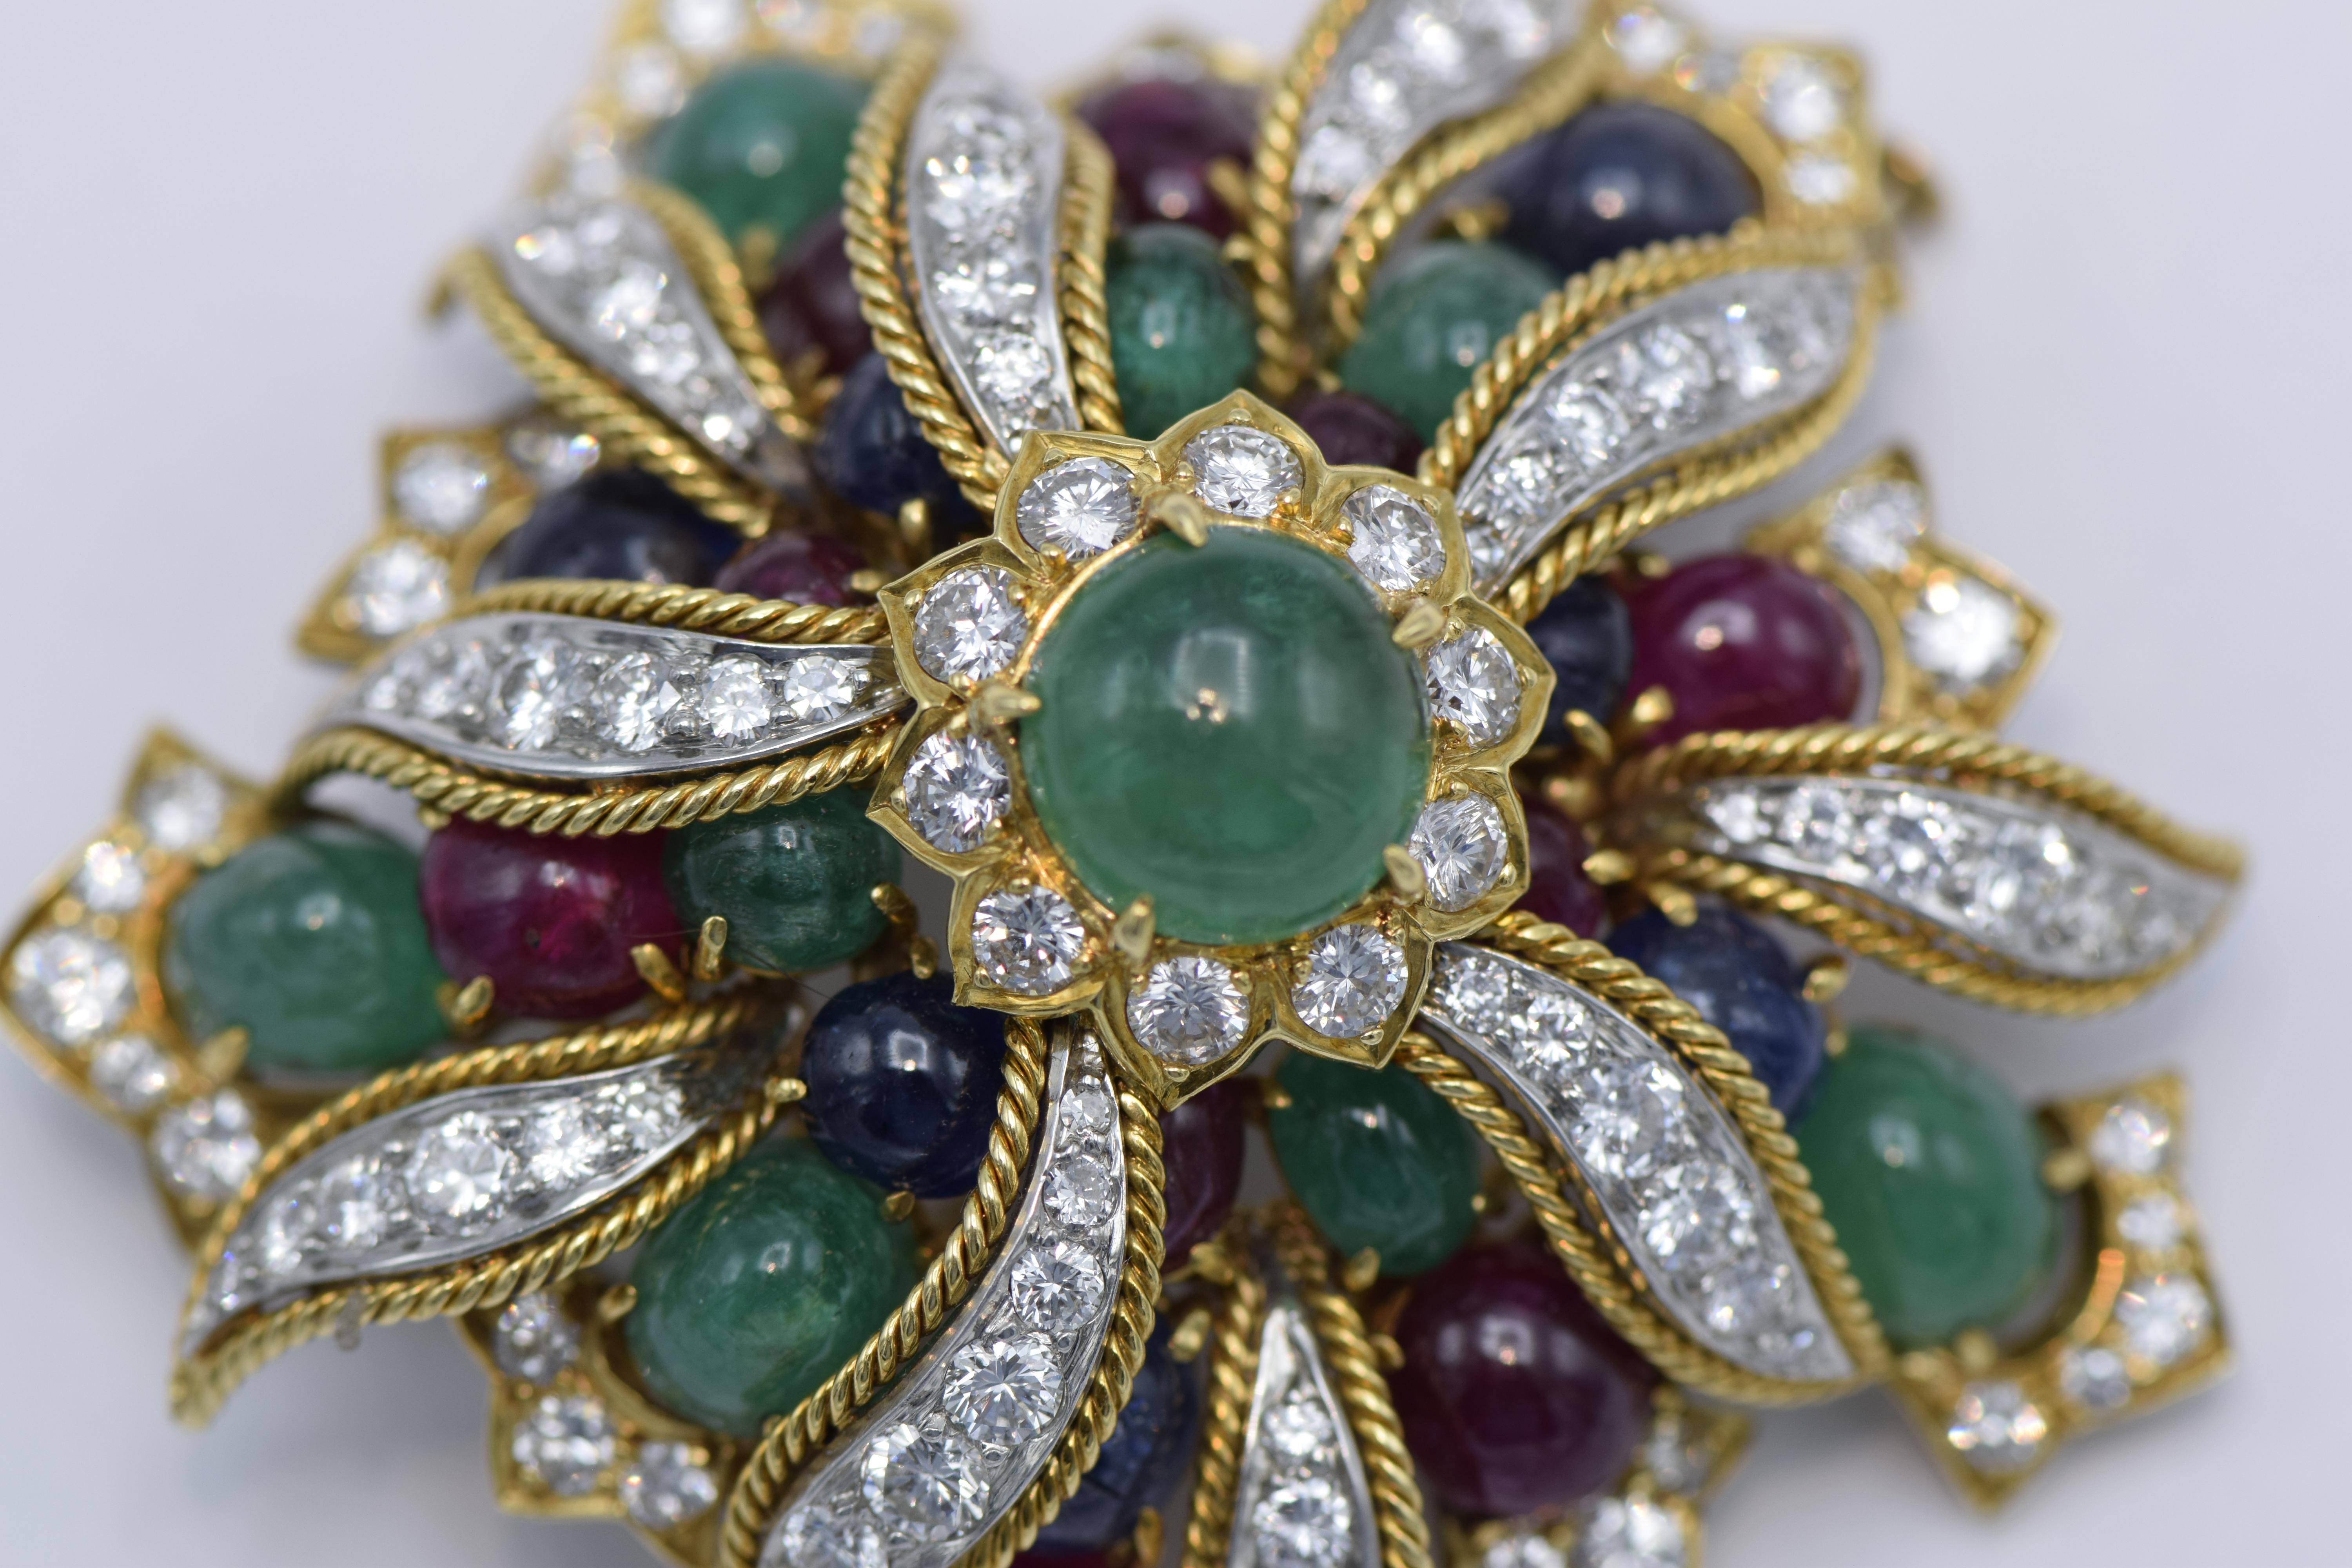 Brooch of cluster floral design, set at the center with cabochon emerald, further decorated with cabochon rubies, sapphires and emeralds, enhanced with round brilliant-cut diamond leaves, the border set with similarly cut diamonds, estimated total